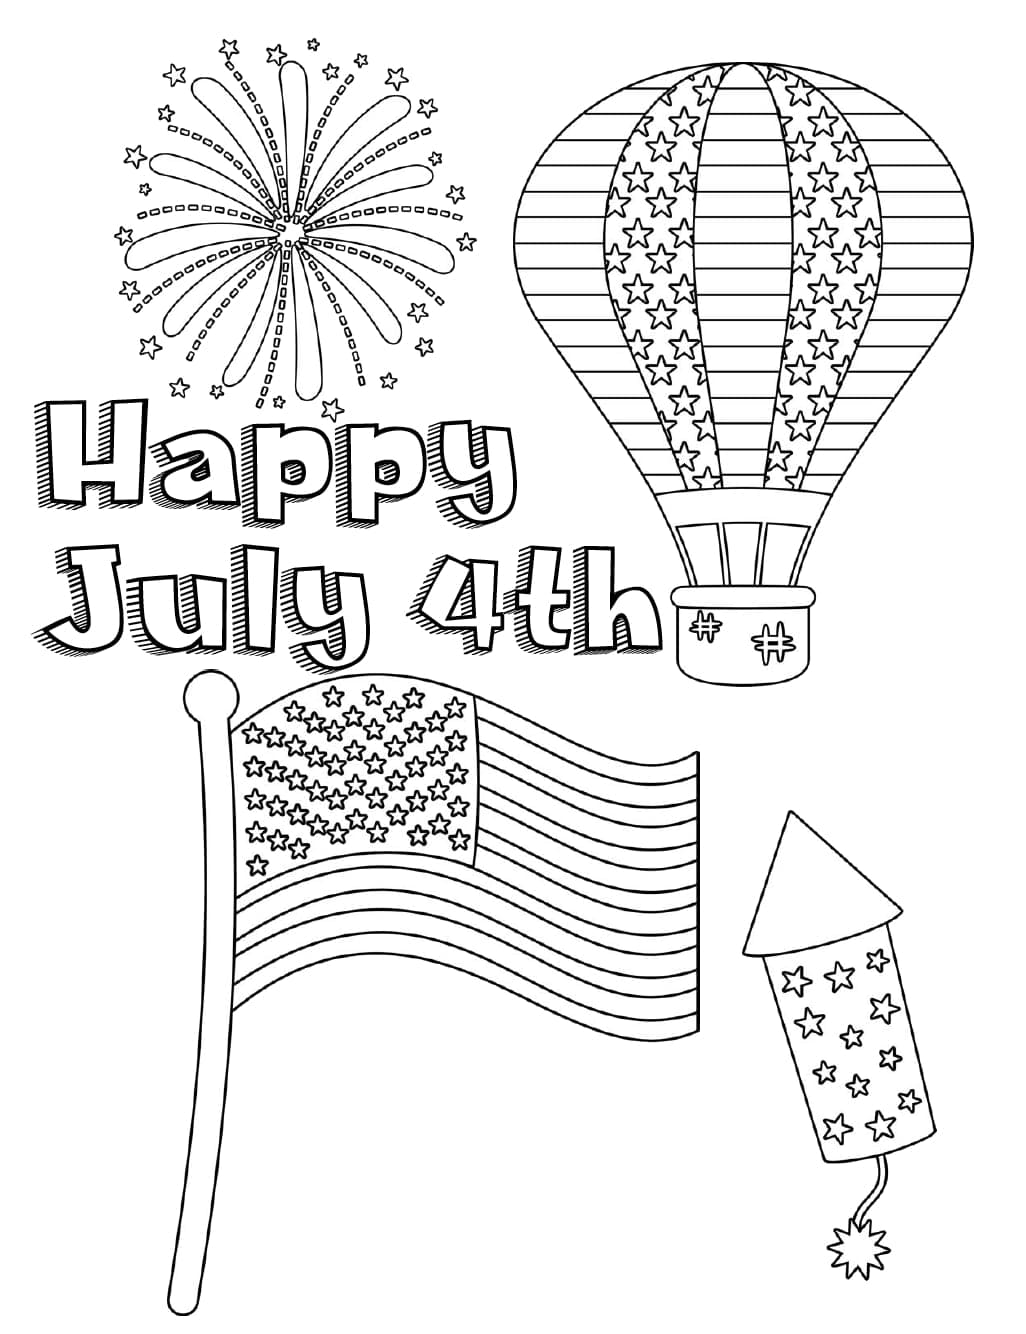 Celebrate Freedom with 4th of July: 180+ Free Coloring Pages 60